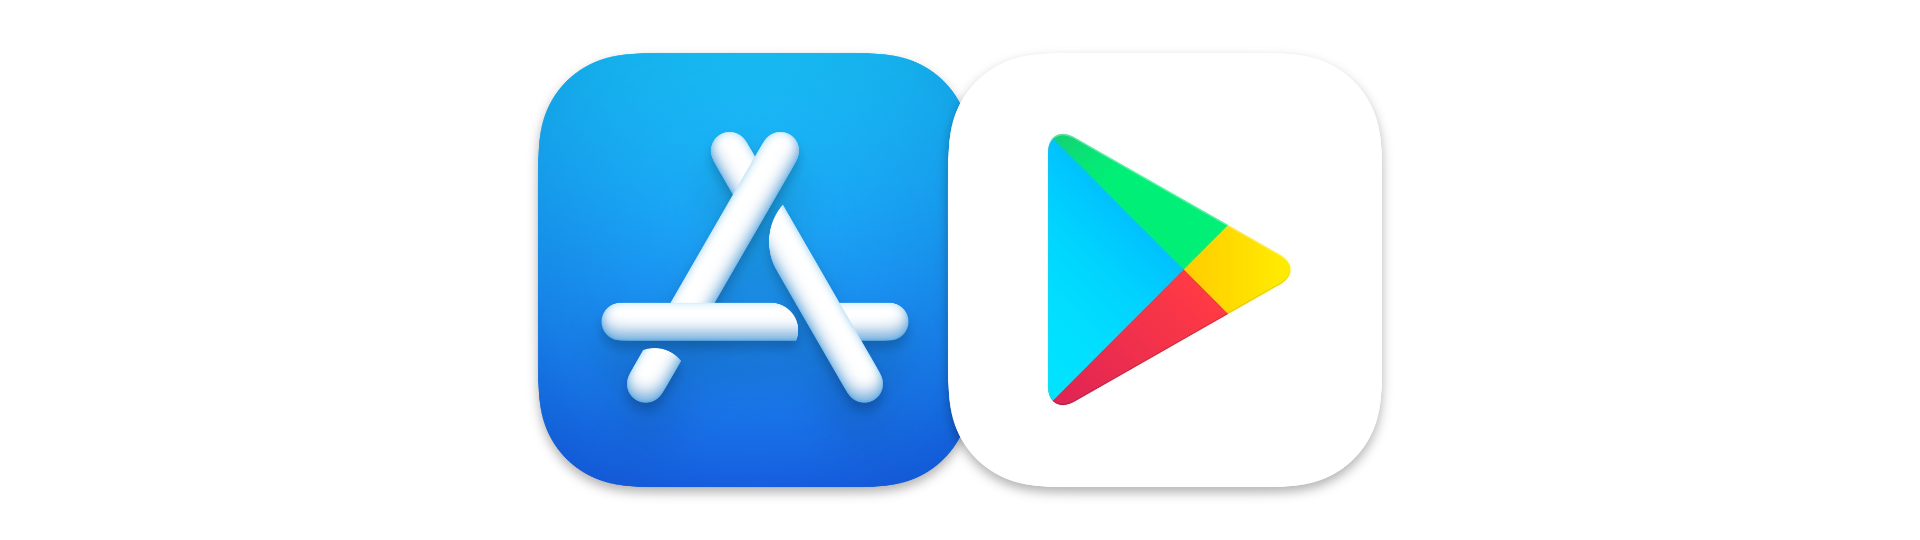 Google Play vs.  Appstore: Which Is Better?